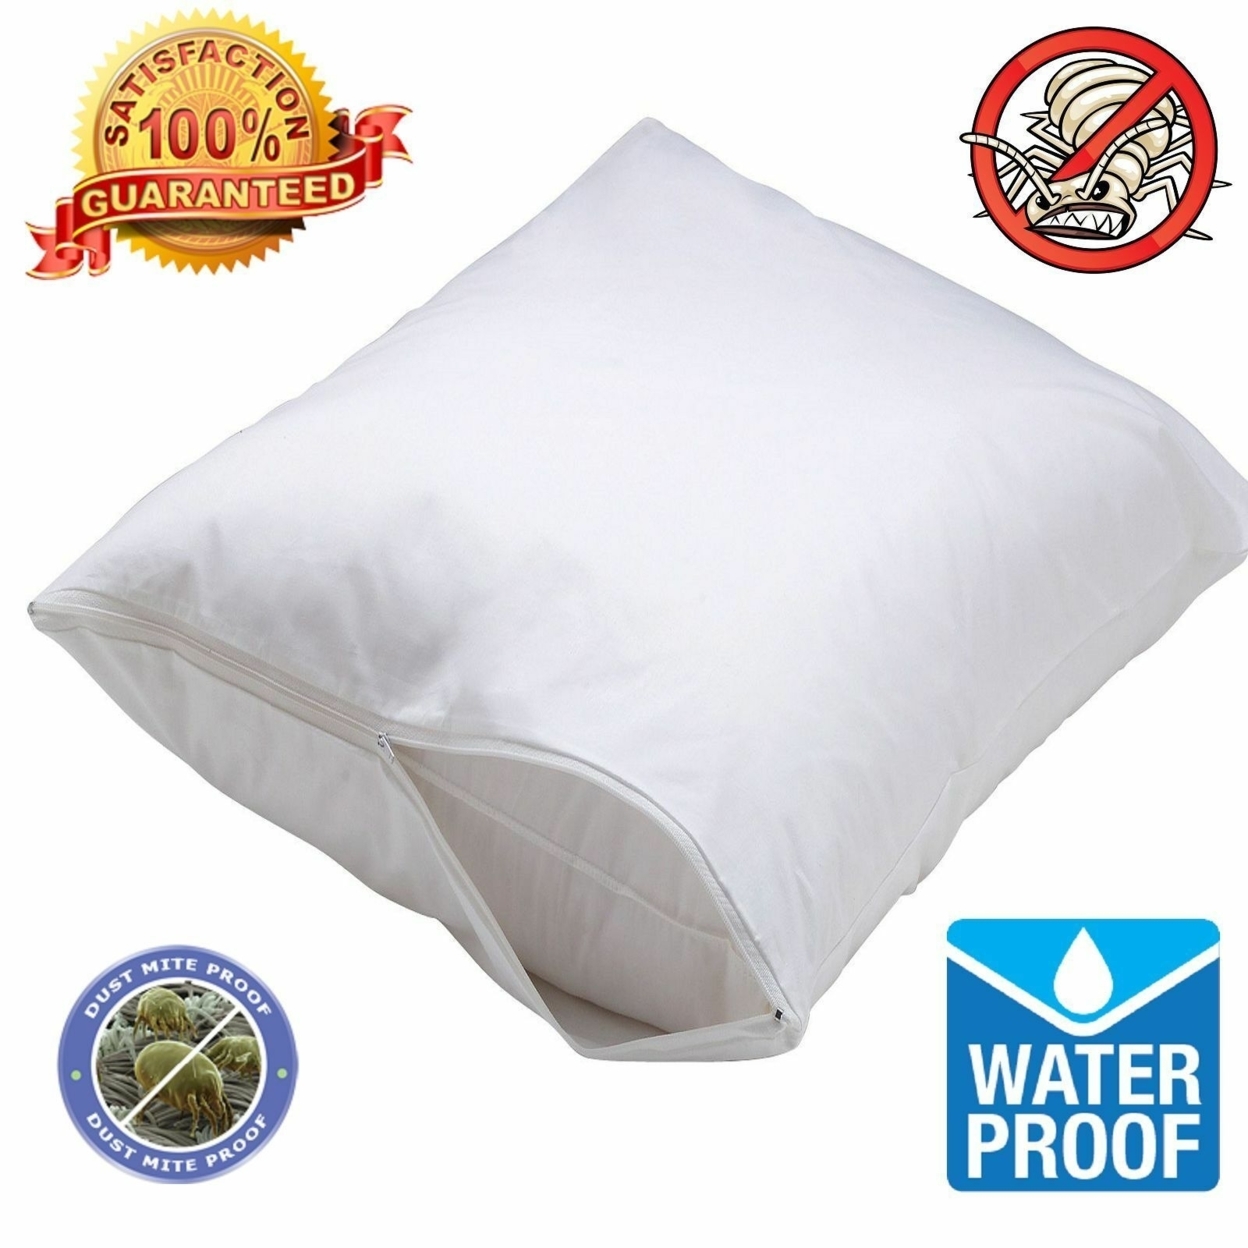 Zippered Fabric Waterproof & Bed Bug/Dust Mite Mattress Cover Protector - Full